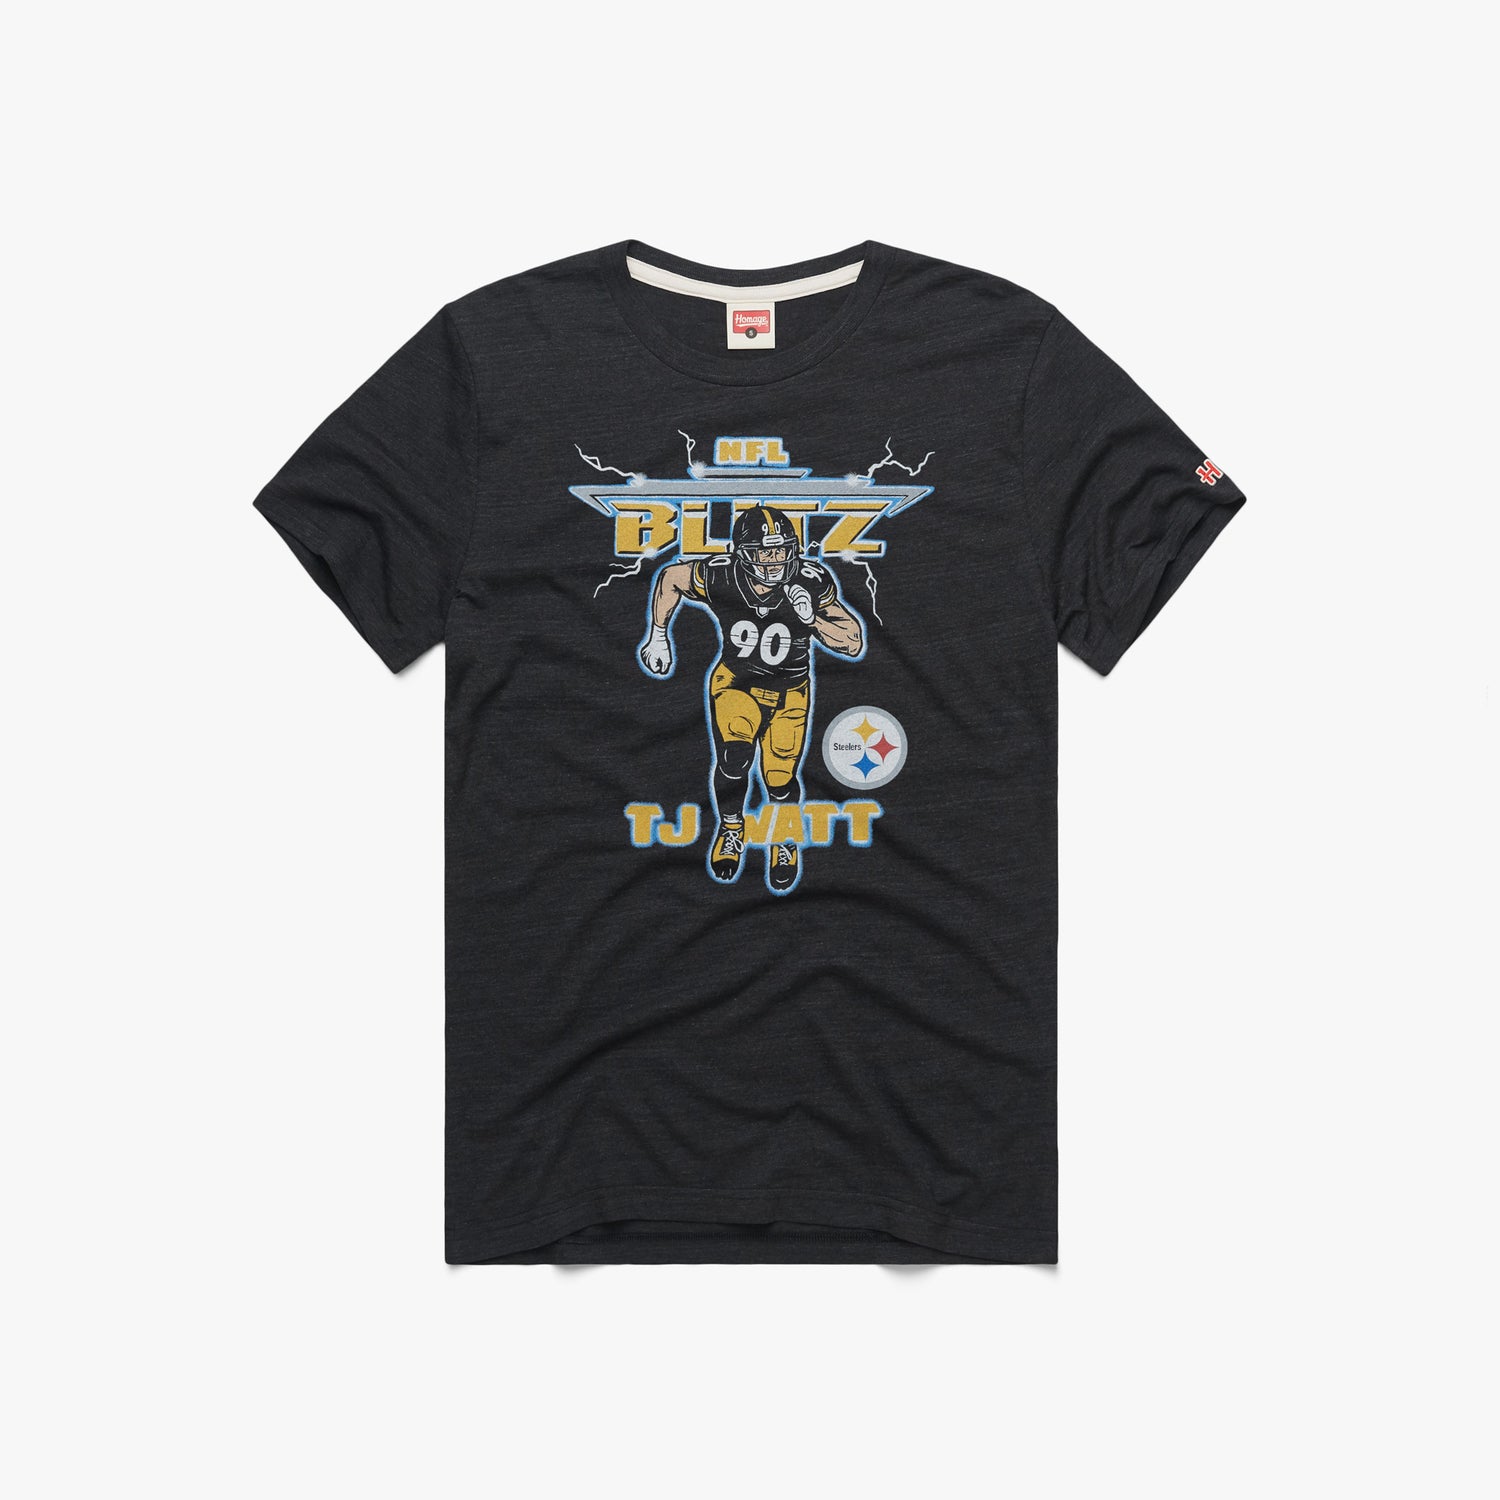 NFL Blitz Pittsburgh Steelers TJ Watt T-Shirt from Homage. | Officially Licensed Vintage NFL Apparel from Homage Pro Shop.